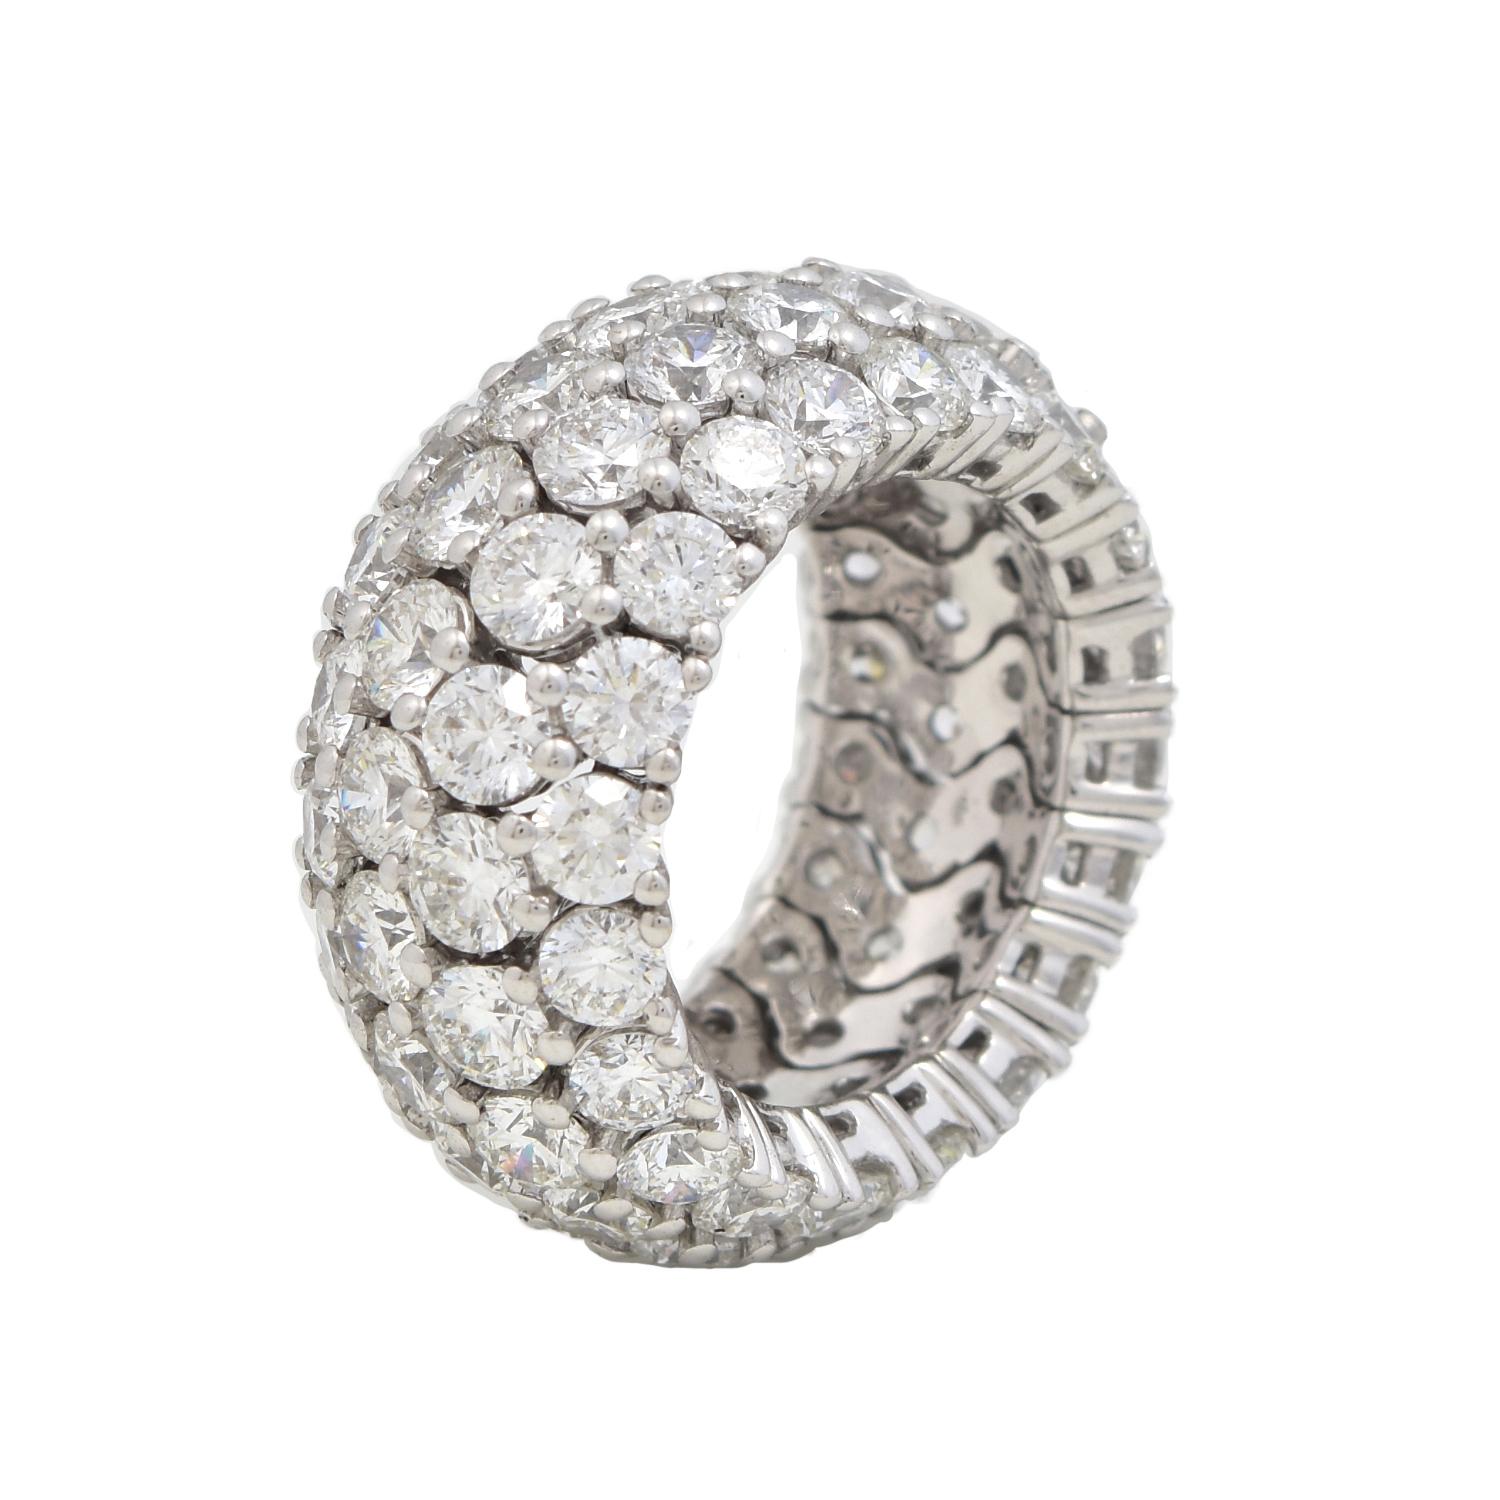 Designer: De Beers

Style: Cocktail Ring

Metal: White Gold

Metal Purity: 18k

Stones:  76 Round Brilliant Cut Diamonds

Diamond Color: D    

Diamond Clarity: VVS

Total Carat Weight:  approx. 15.0

Total Item Weight (grams): 15.3

Band Thickness: